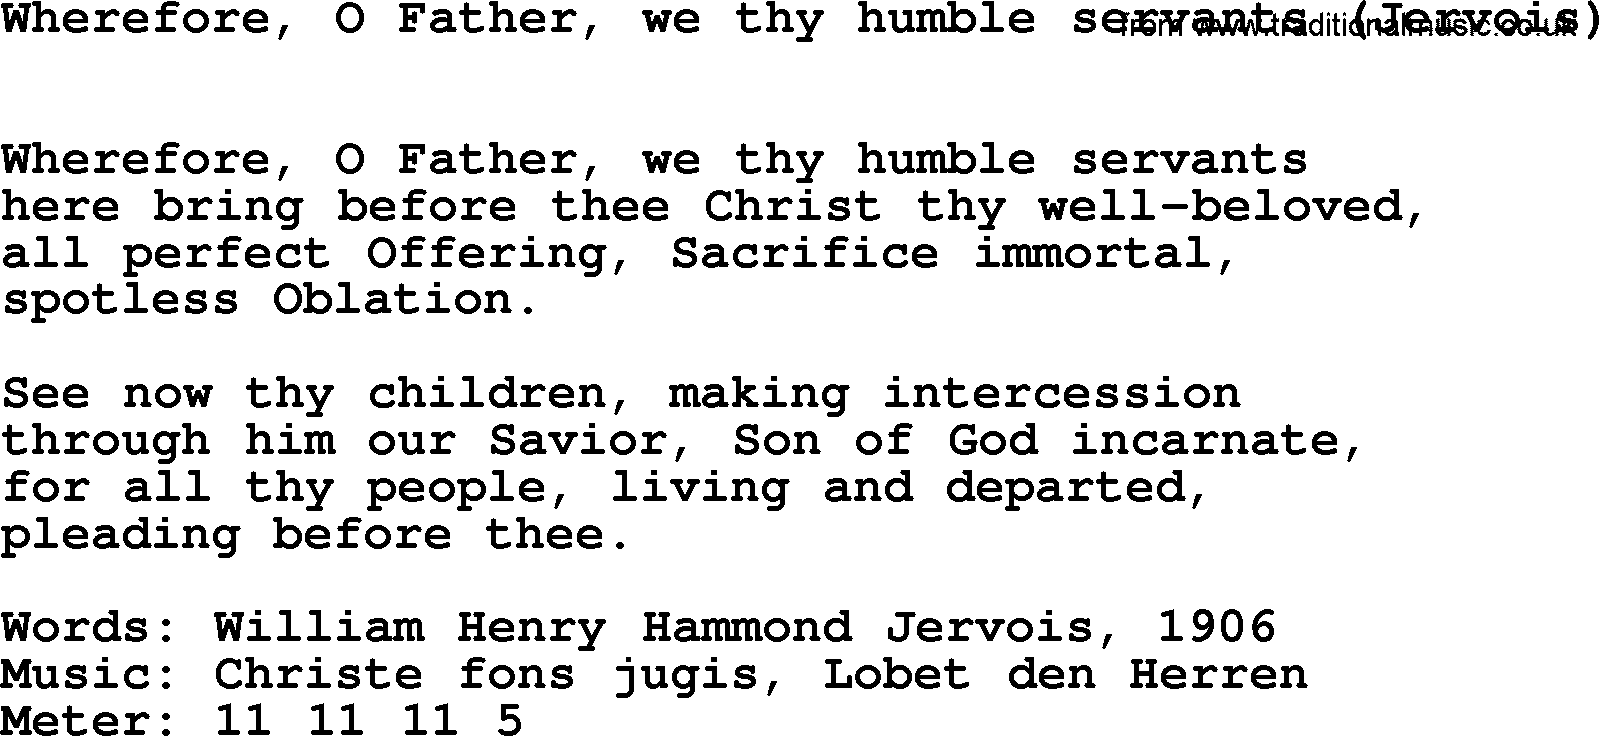 Hymns Ancient and Modern Hymn: Wherefore, O Father, We Thy Humble Servants (jervois), lyrics with midi music